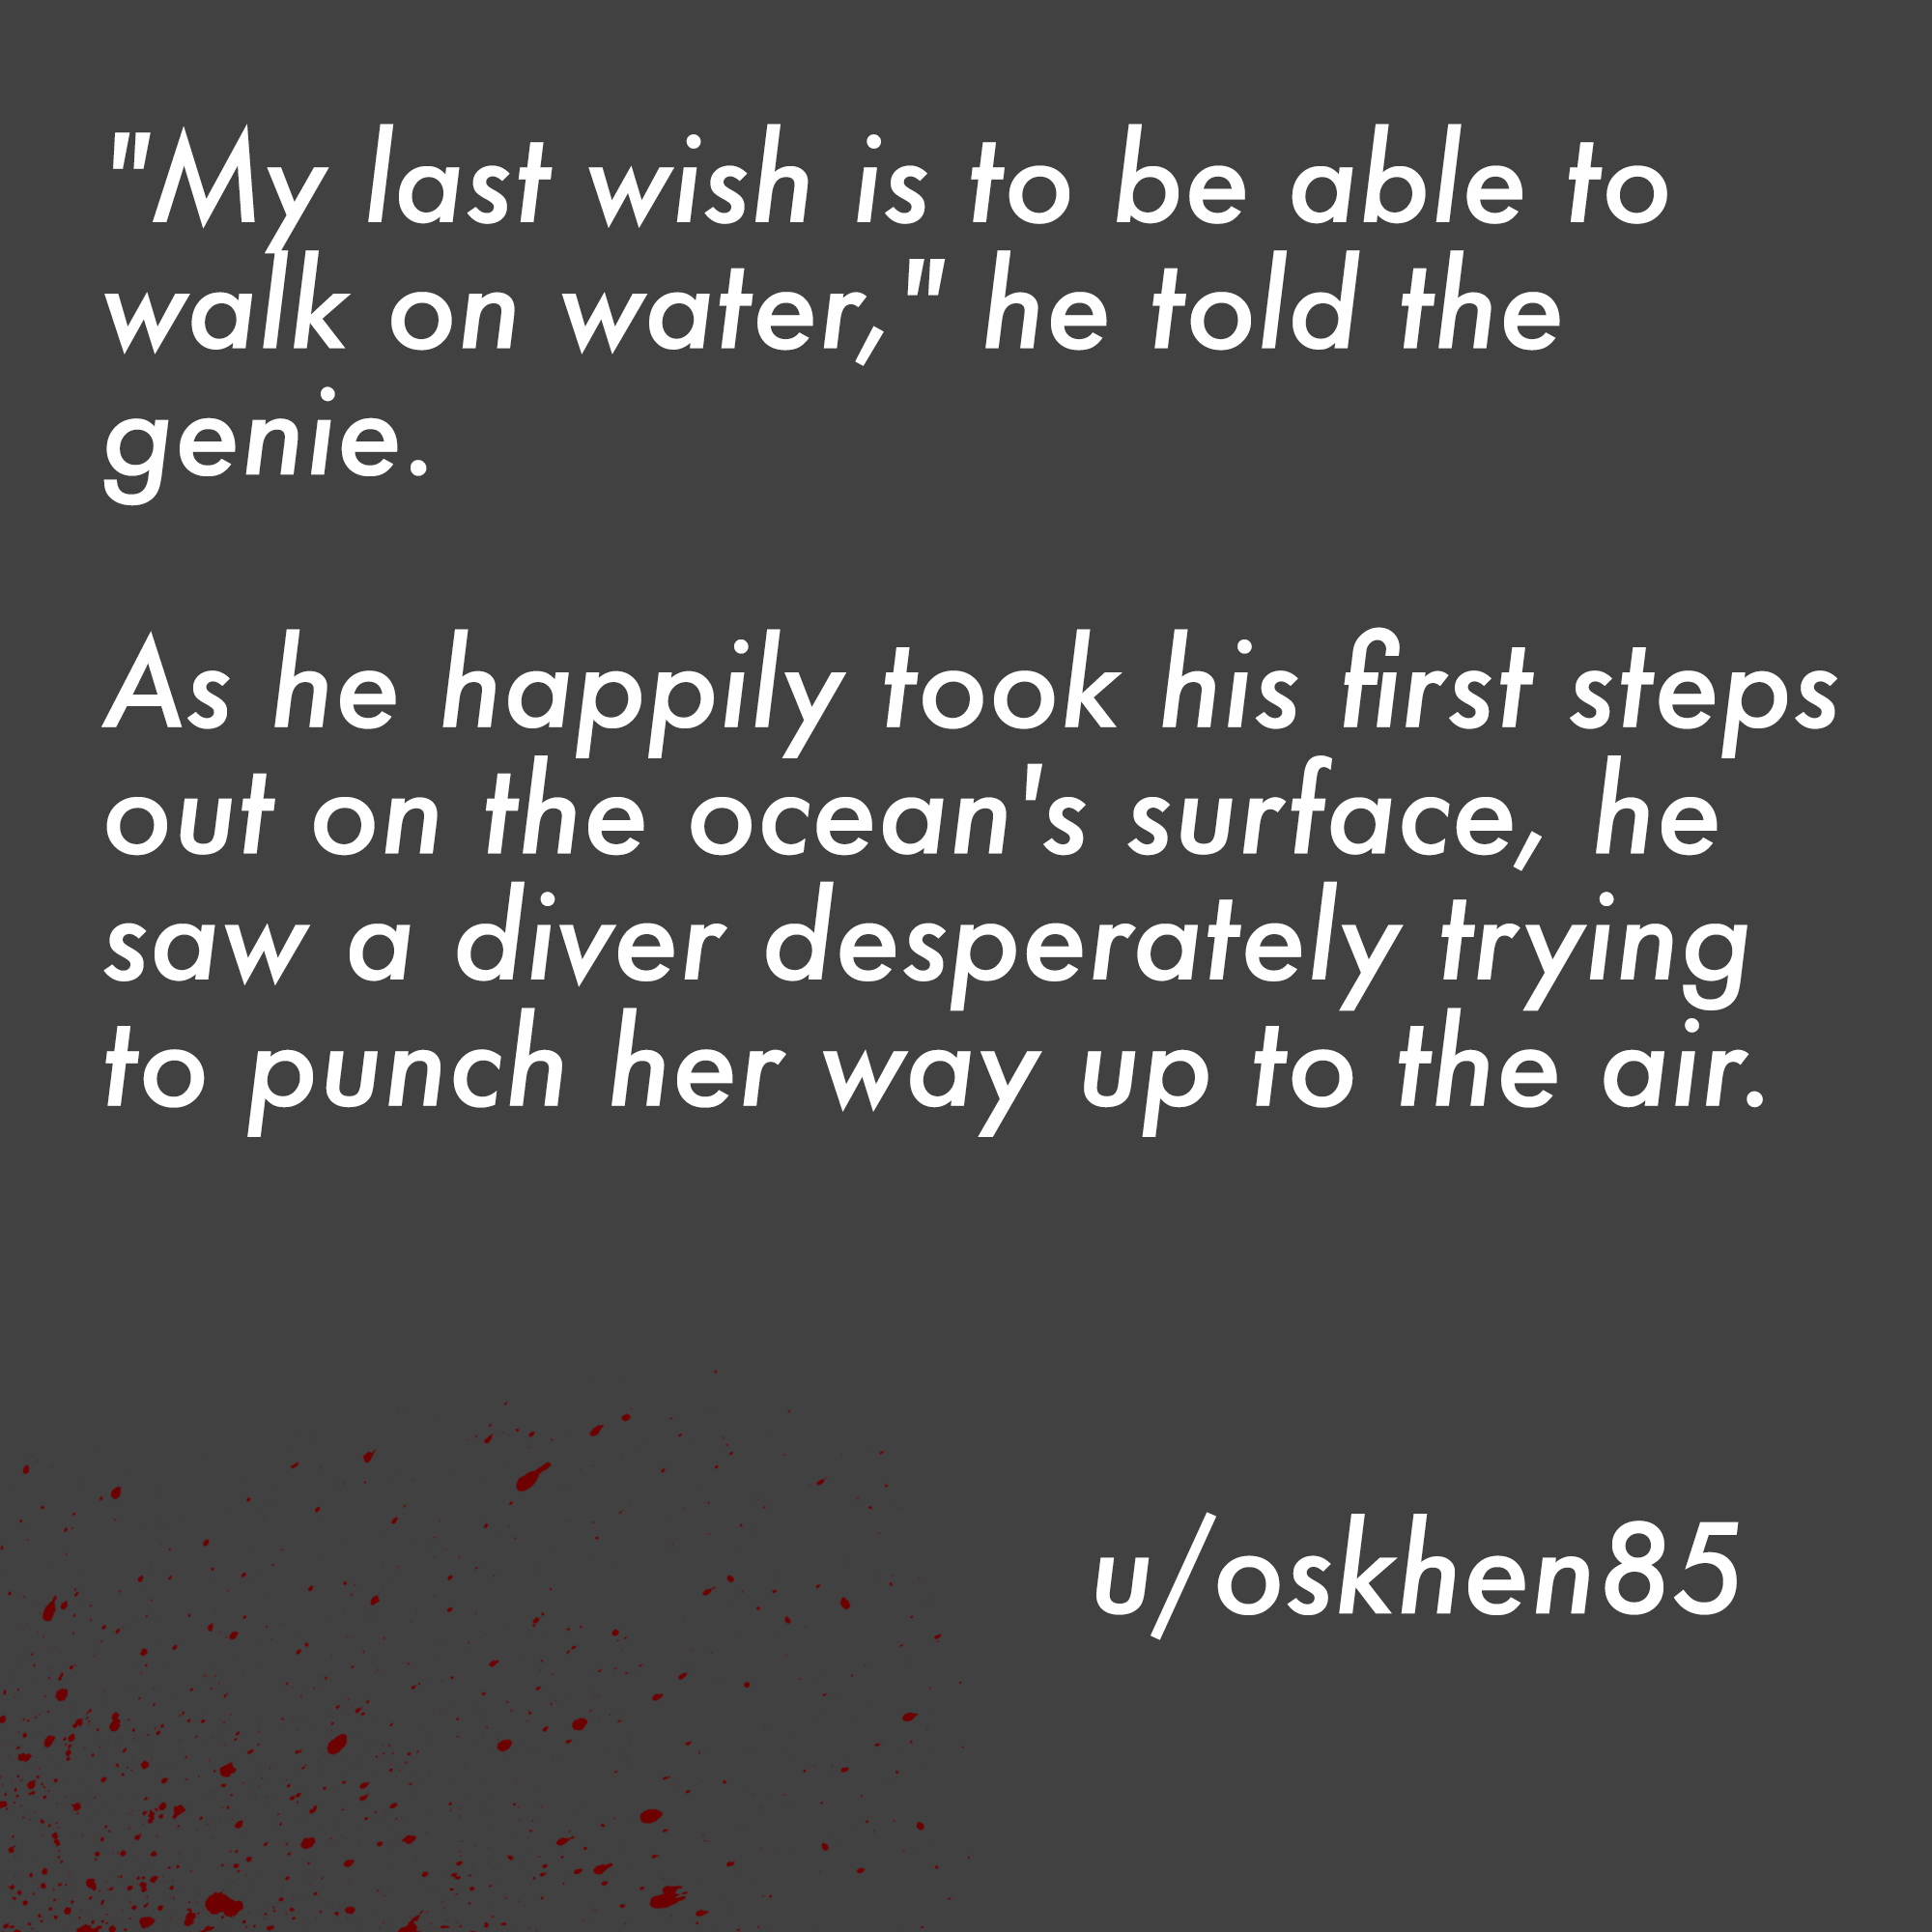 two line horror stories - abel tesfaye - "My last wish is to be able to walk on water," he told the genie. As he happily took his first steps out on the ocean's surface, he saw a diver desperately trying to punch her way up to the air. uoskhen85